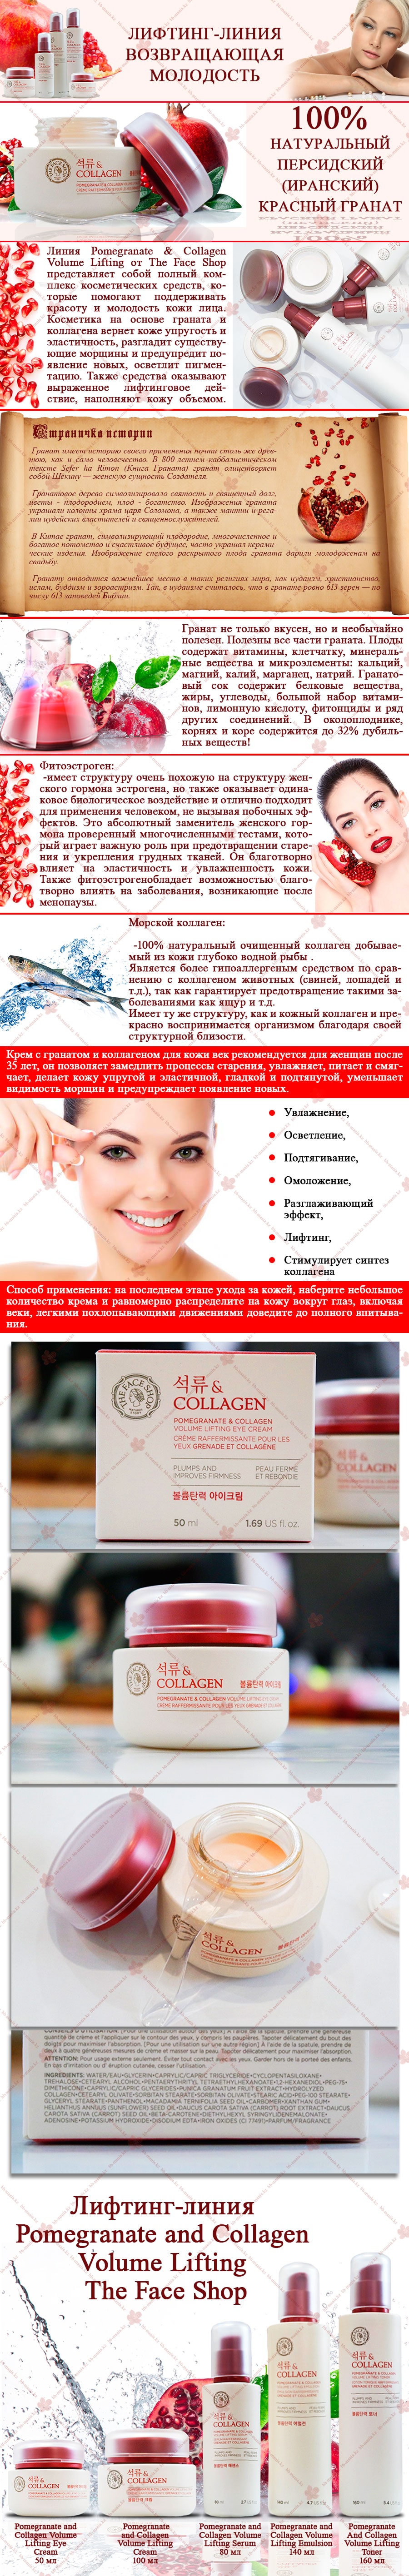 Pomegranate-and-Collagen-Volume-Lifting-Eye-Cream-[The-Face-Shop]-min